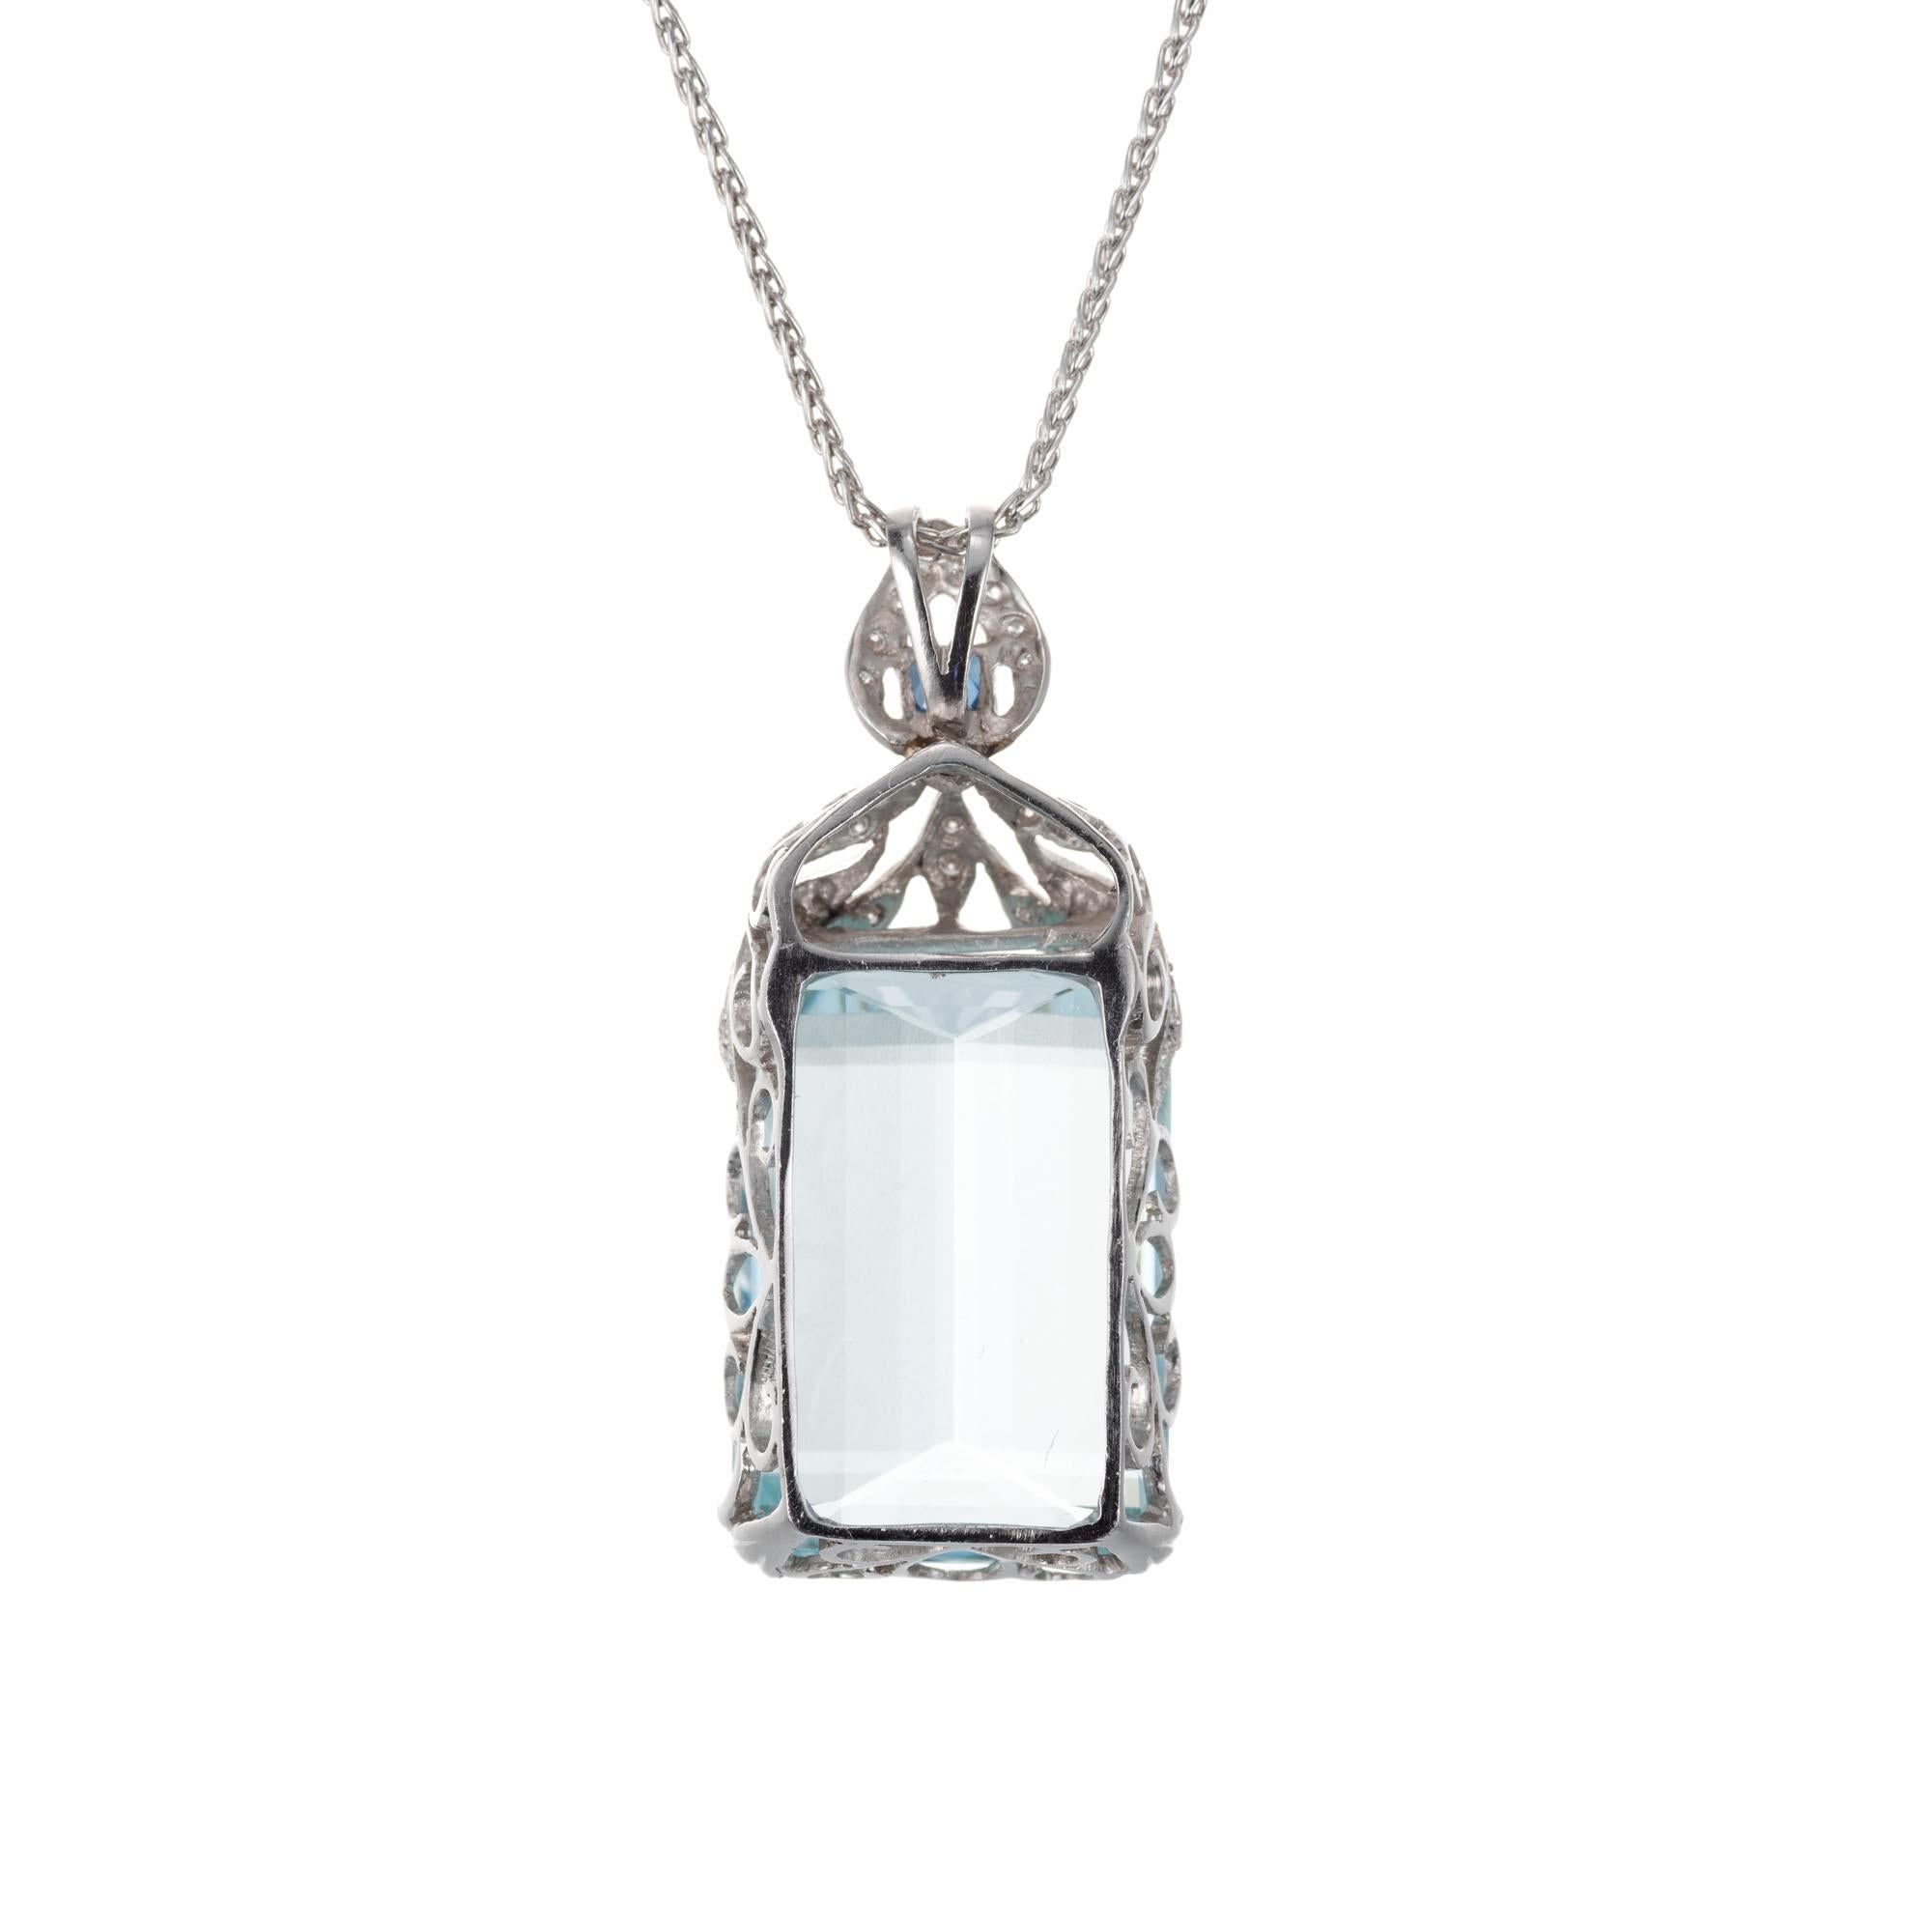 Original natural light slightly greenish blue aquamarine. Scroll setting with a French cut sapphire and 28 accent diamonds, set in platinum. 

1 natural untreated emerald cut 23.20ct aquamarine
1 French cut genuine sapphire .15cts.
28 diamonds